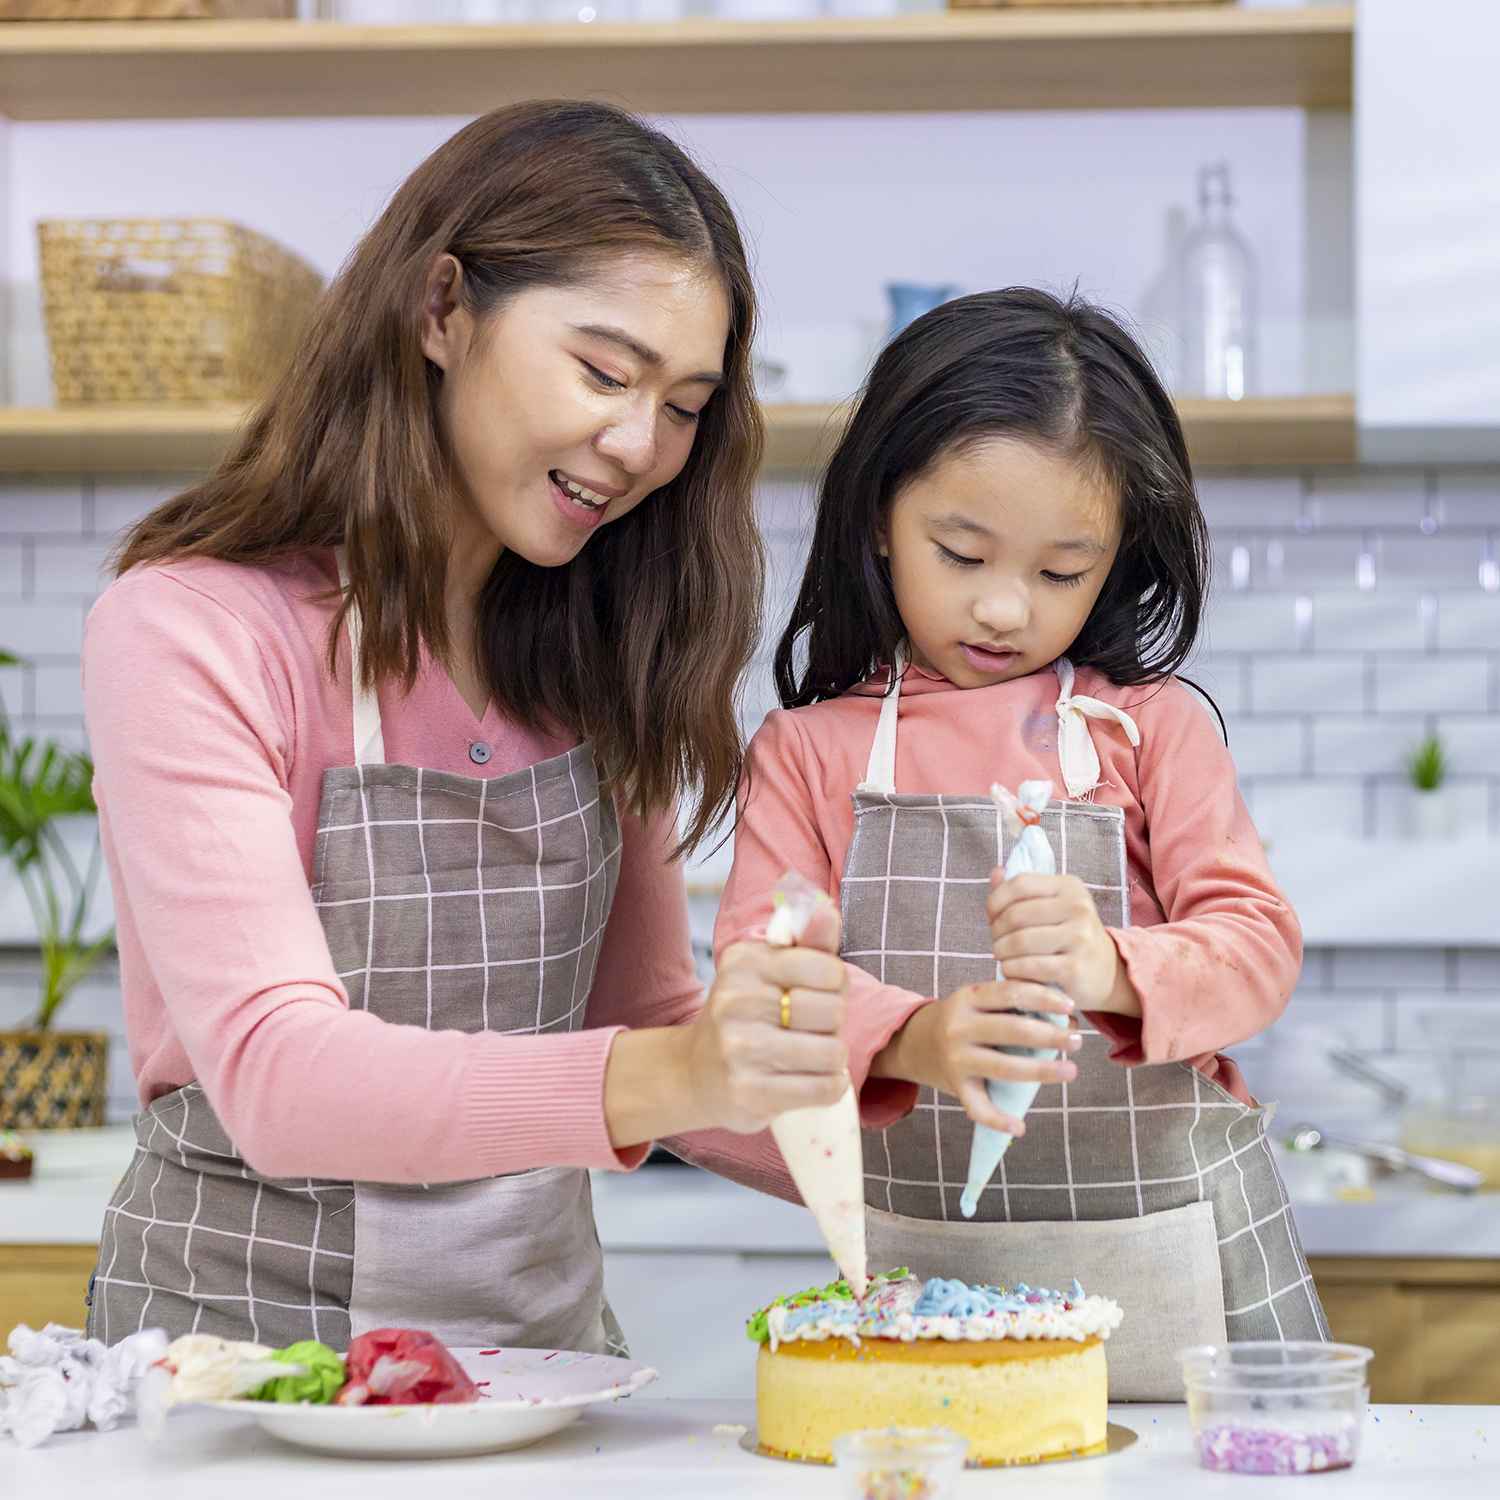 Young Bakers | grades 3-5